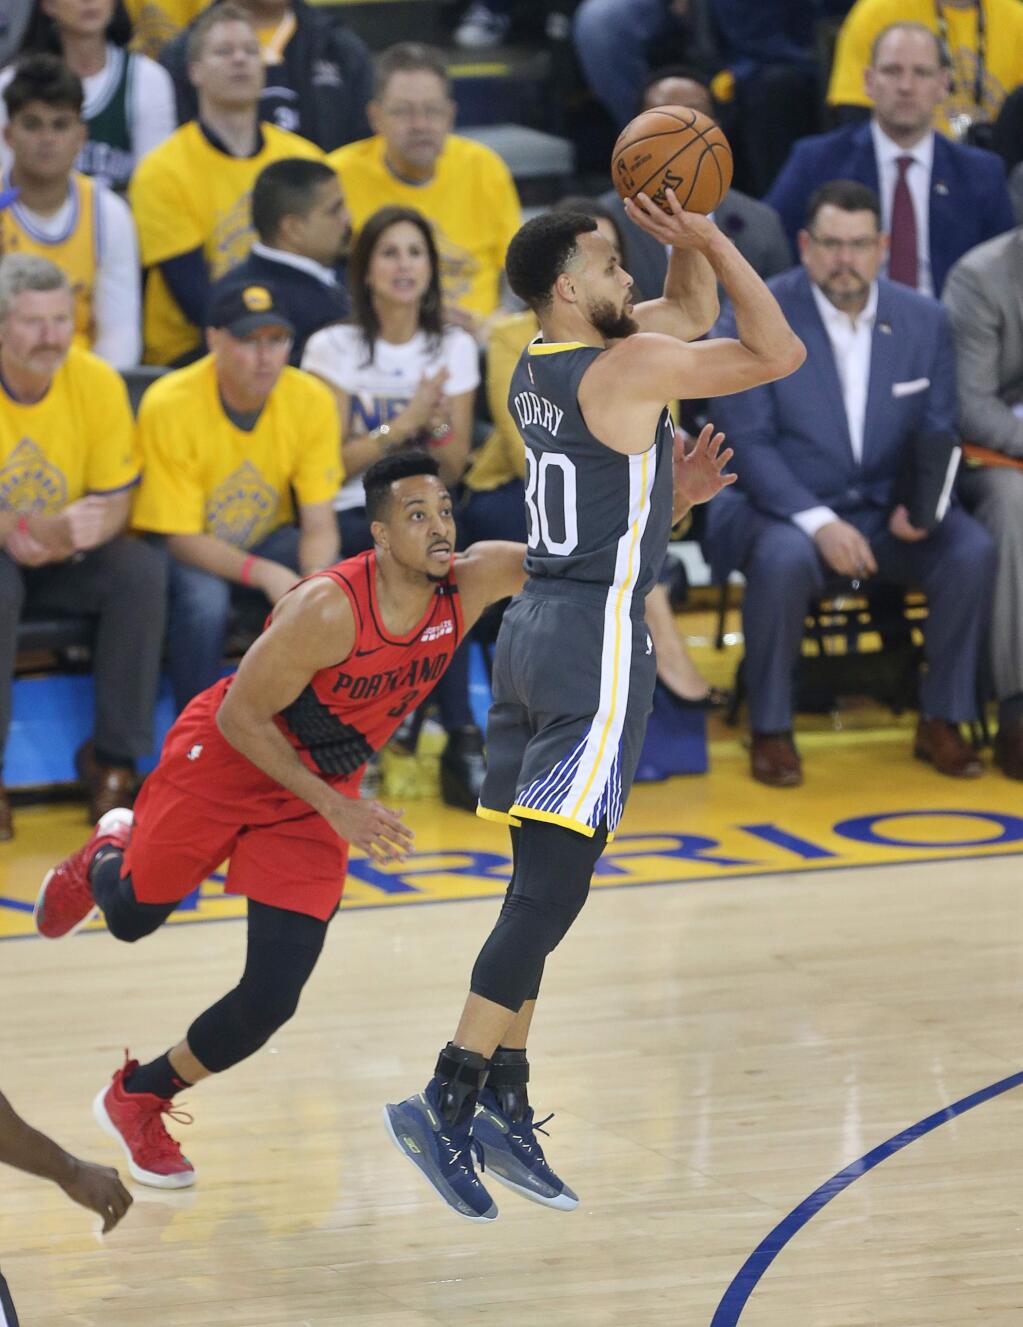 Golden State Warriors guard Stephen Curry shoots a three-pointer against Portland Trail Blazers guard CJ McCollum during game 2 of the NBA Western Conference Finals in Oakland on Thursday, May 16, 2019. (Christopher Chung/ The Press Democrat)